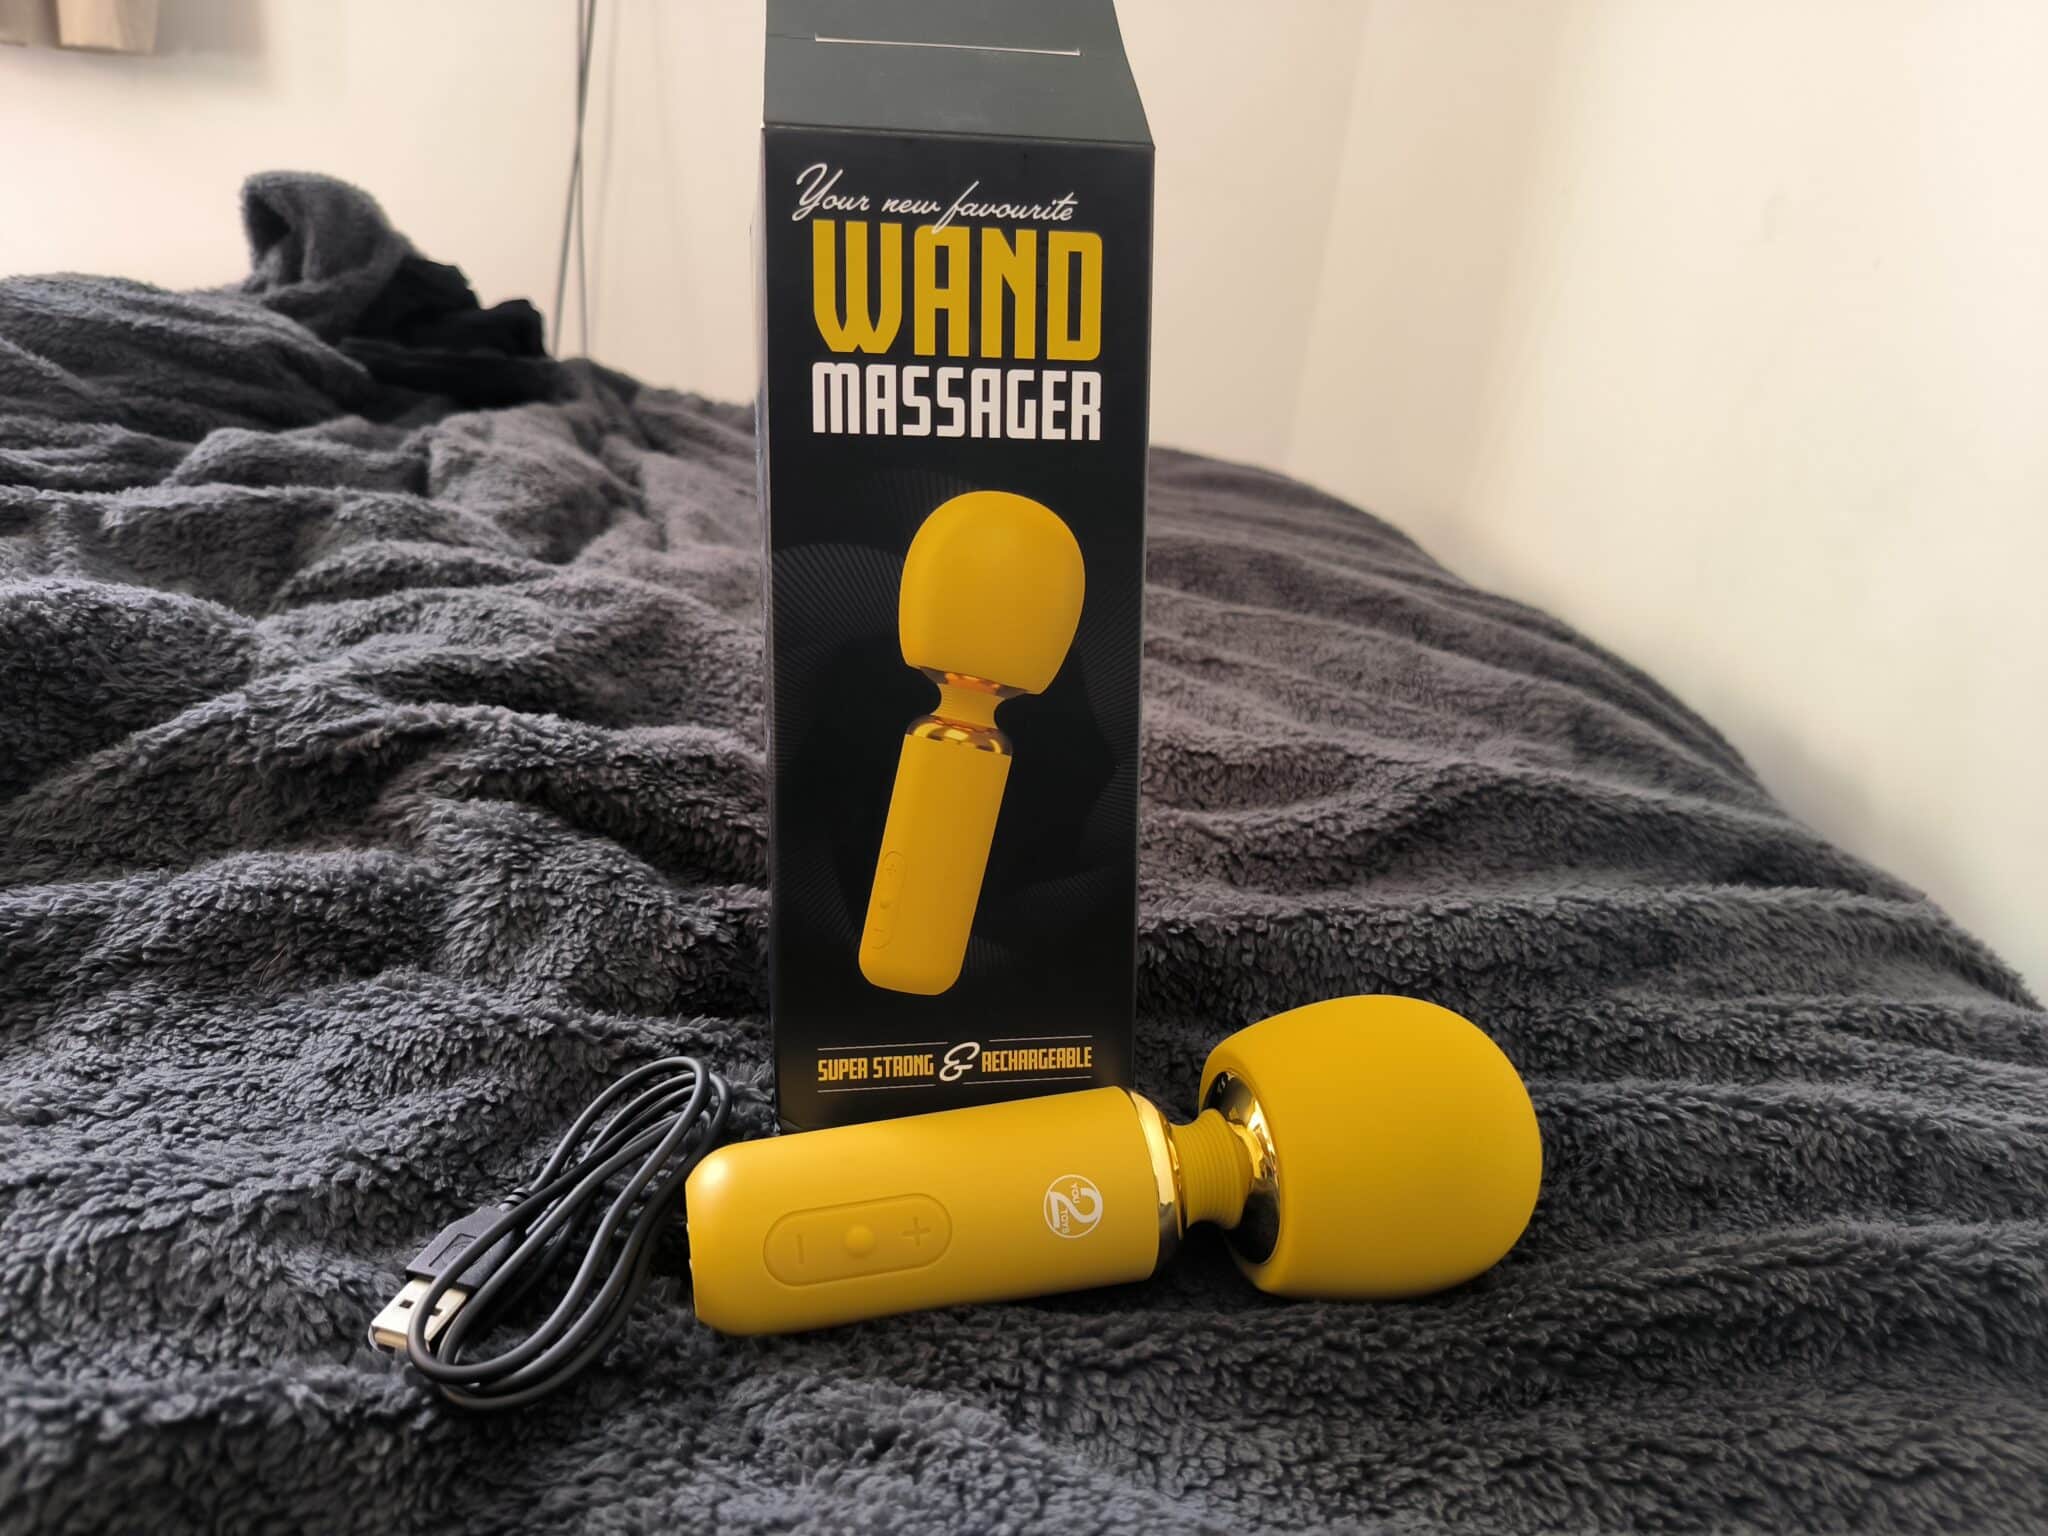 Your New Favorite Wand Massager The Simplicity of Your New Favorite Wand Massager: My User Experience Unveiled